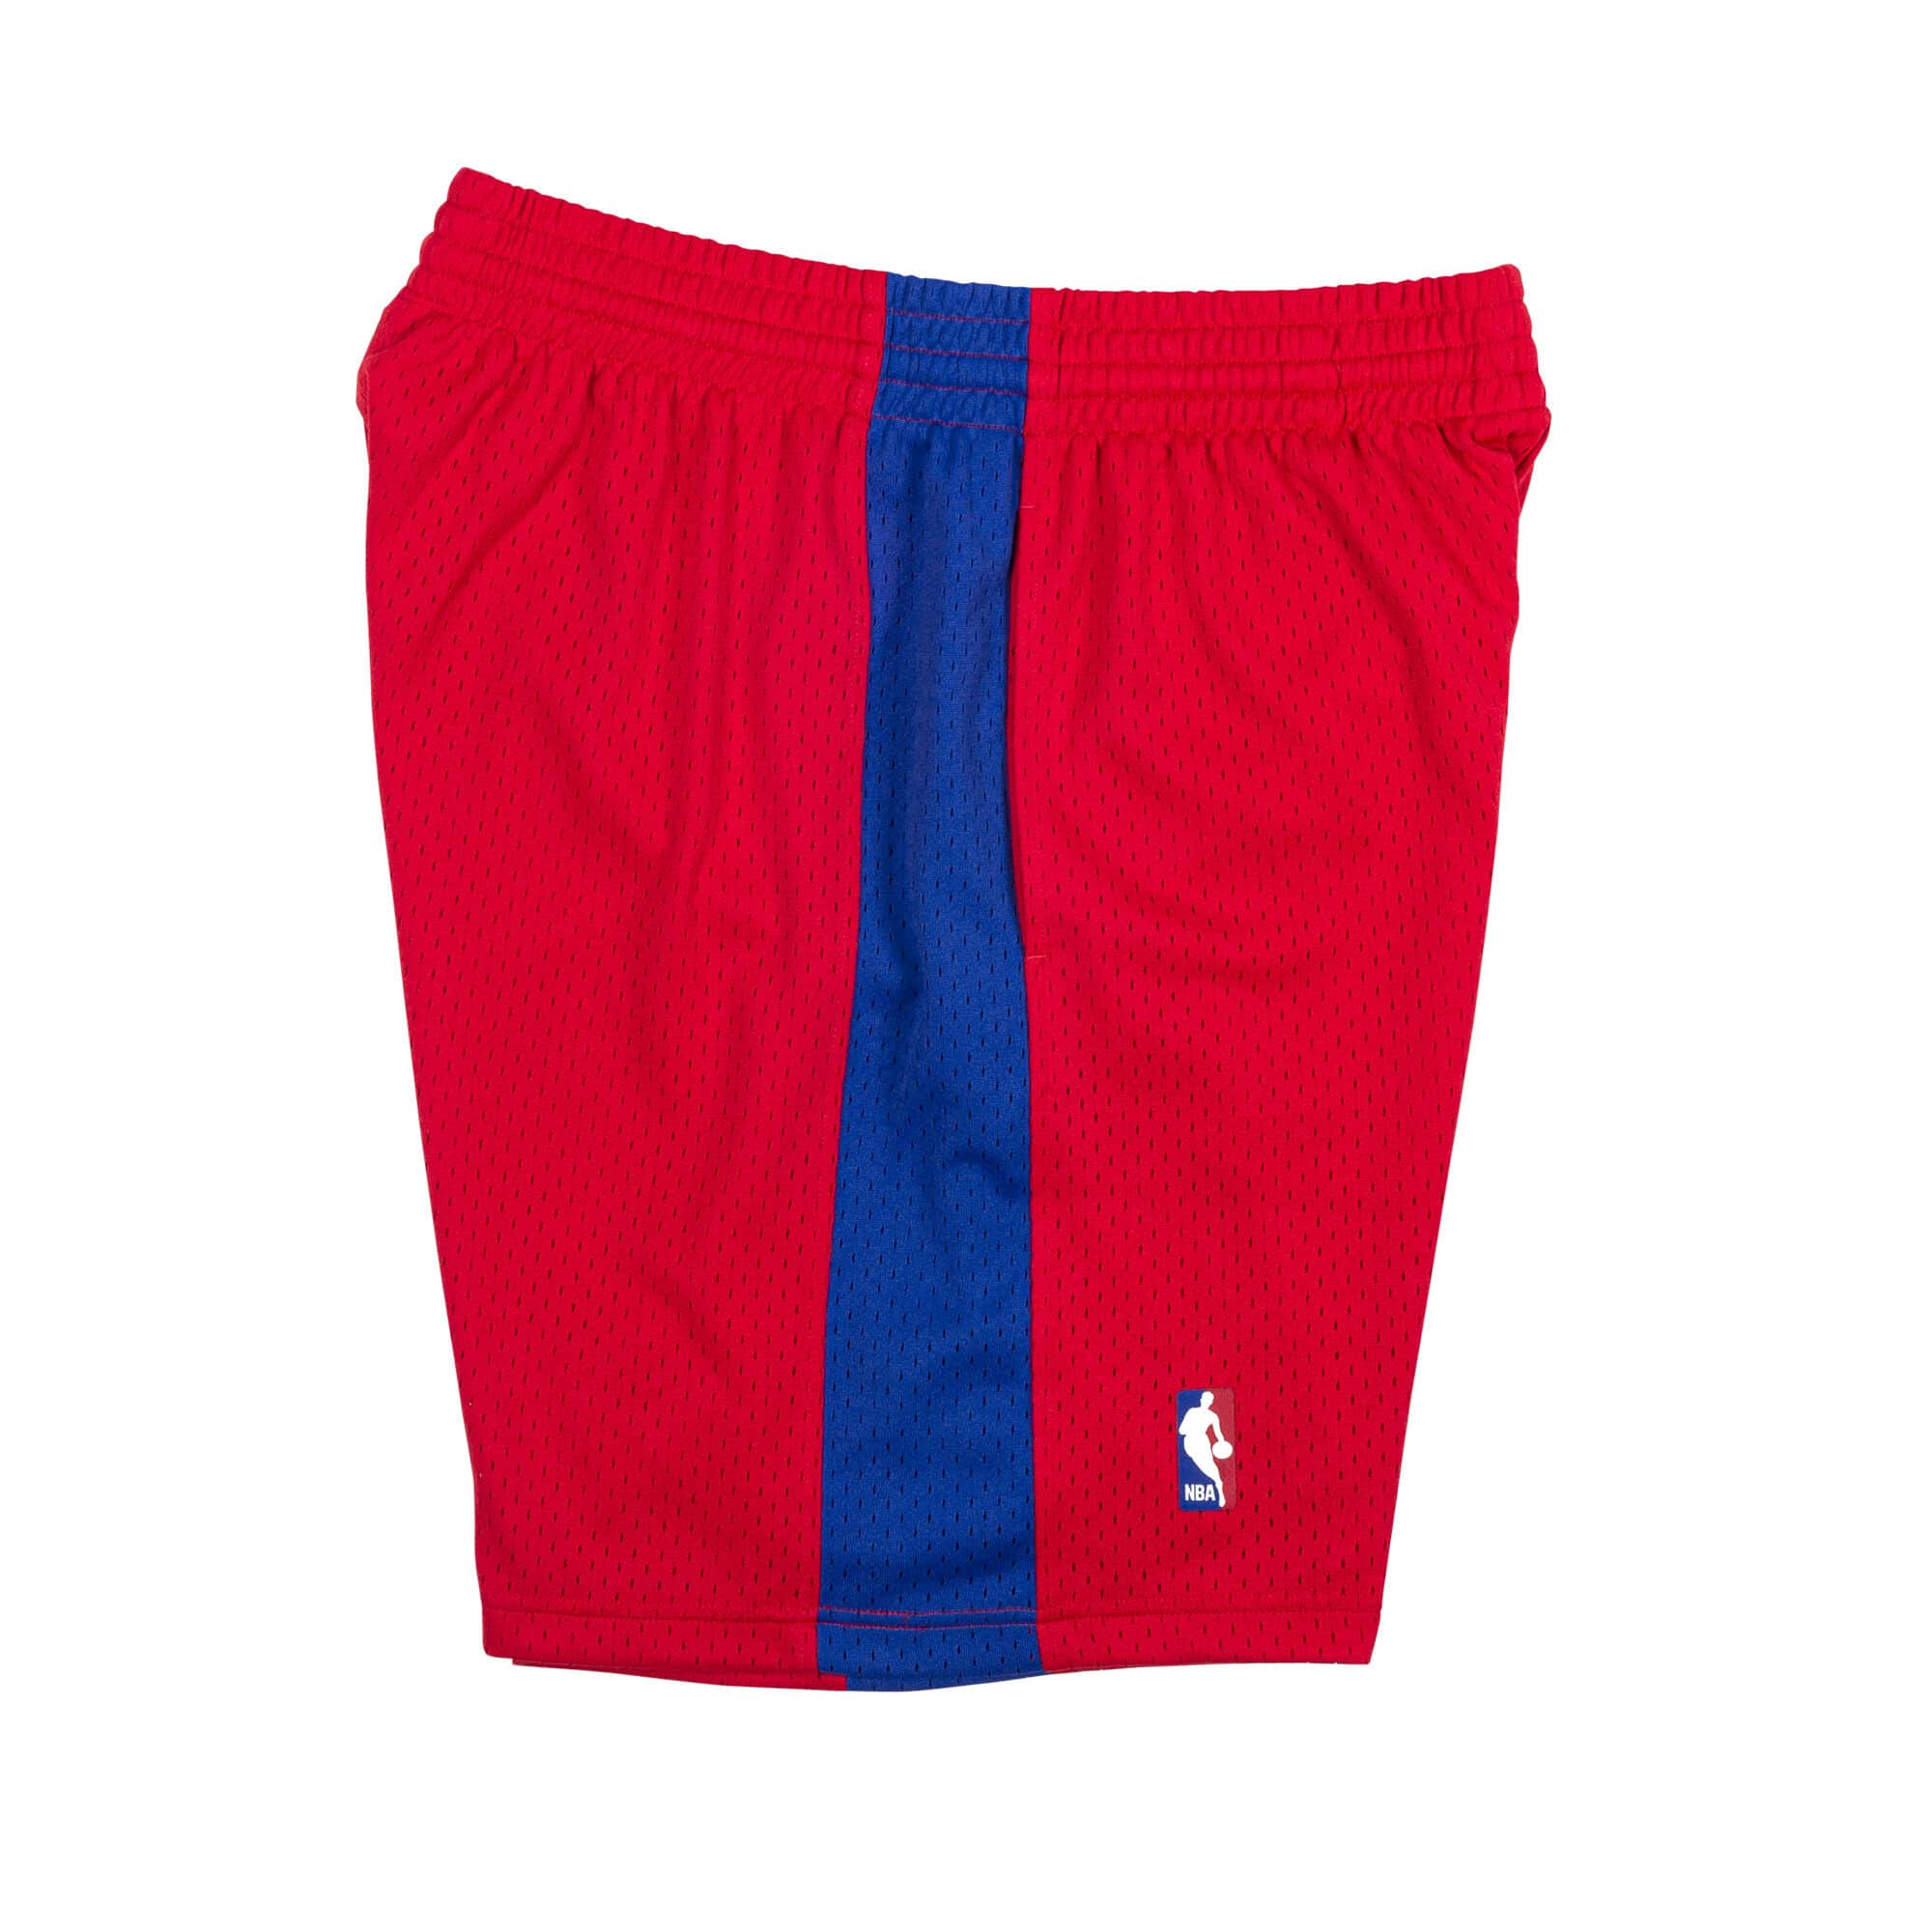 2000-01 Red Los Angeles Clippers Mitchell & Ness Hardwood Classics Swingman Shorts